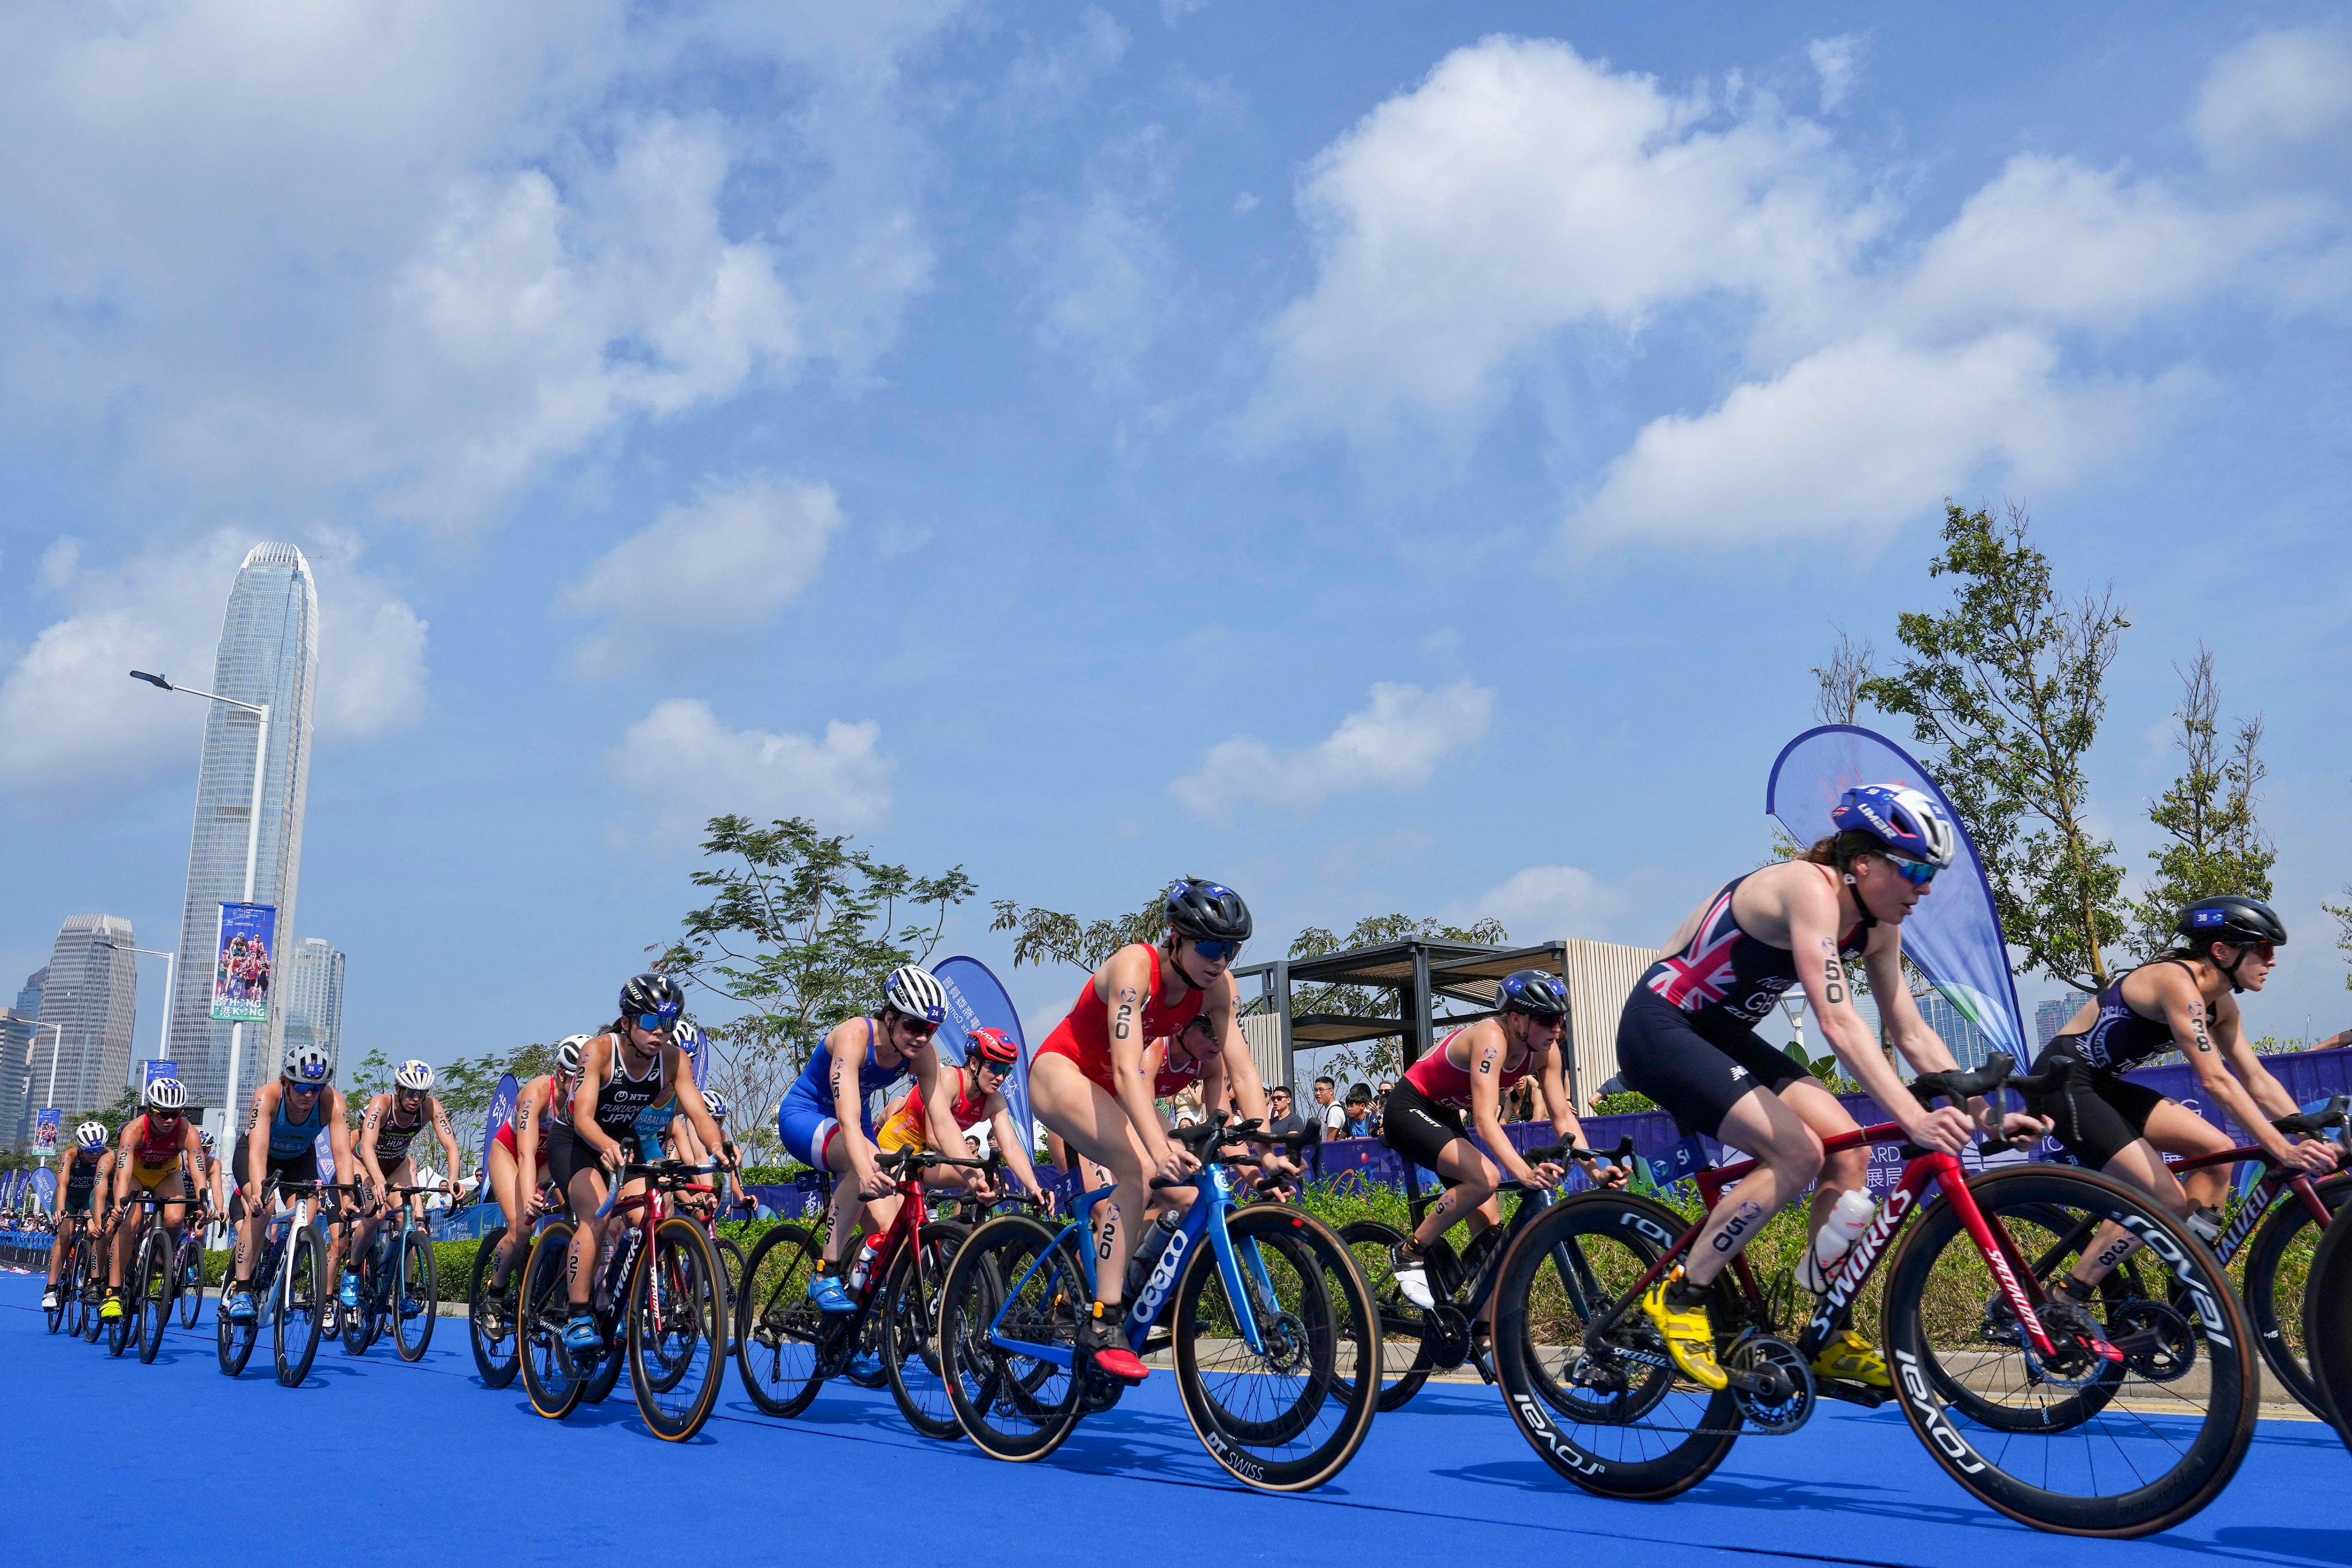 Team GB’s Vicky Holland (right) sits in the middle of the pack during the elite women’s race during the Hong Kong leg of the World Triathlon Cup. Photo: Elson Li